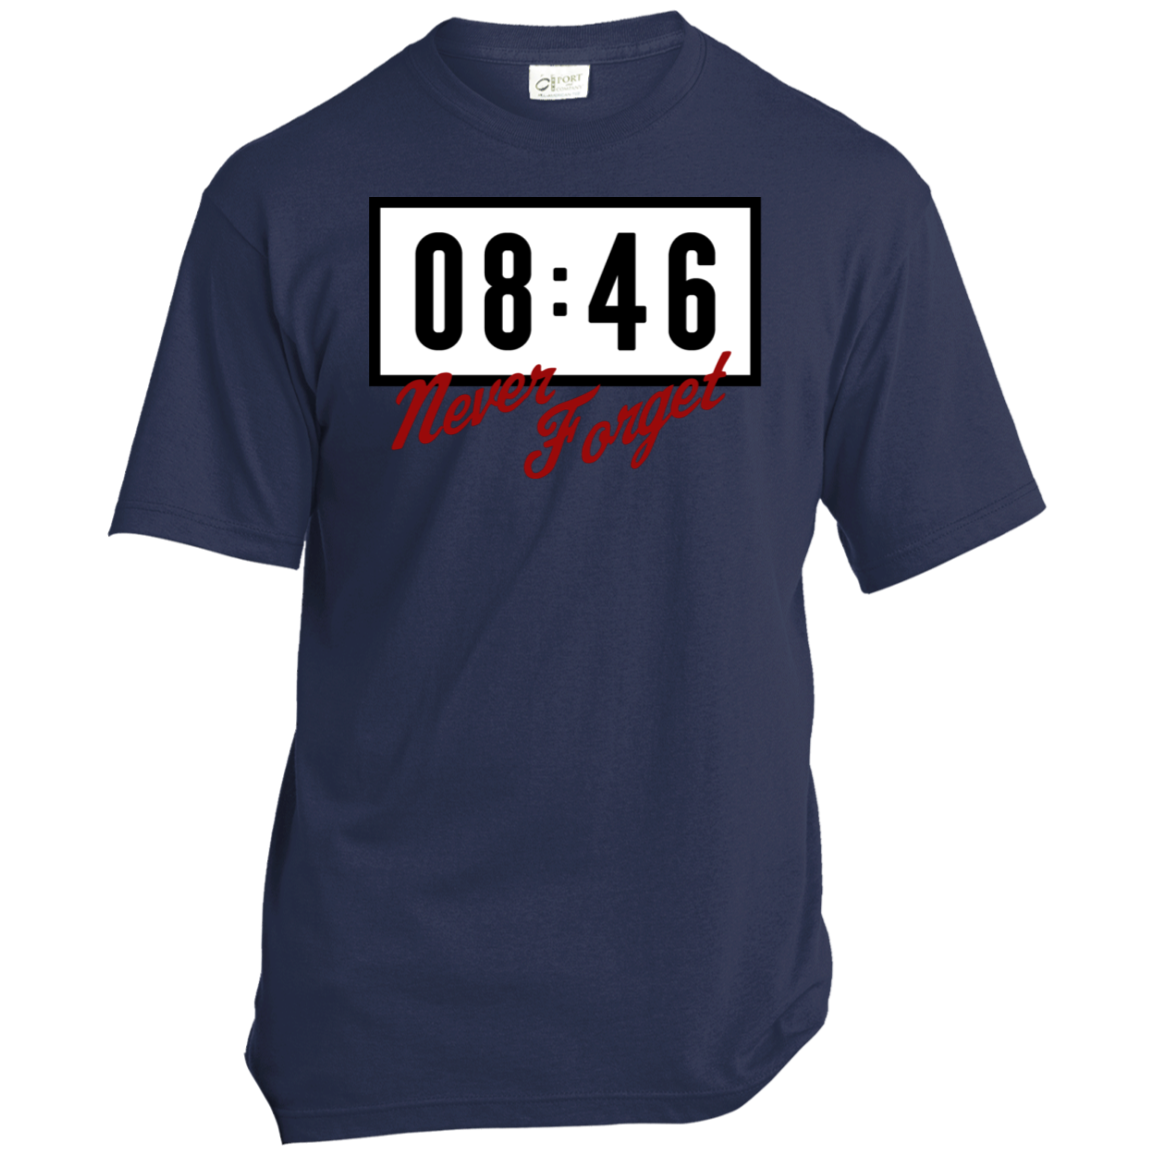 USA100 Made in the USA Unisex T-Shirt